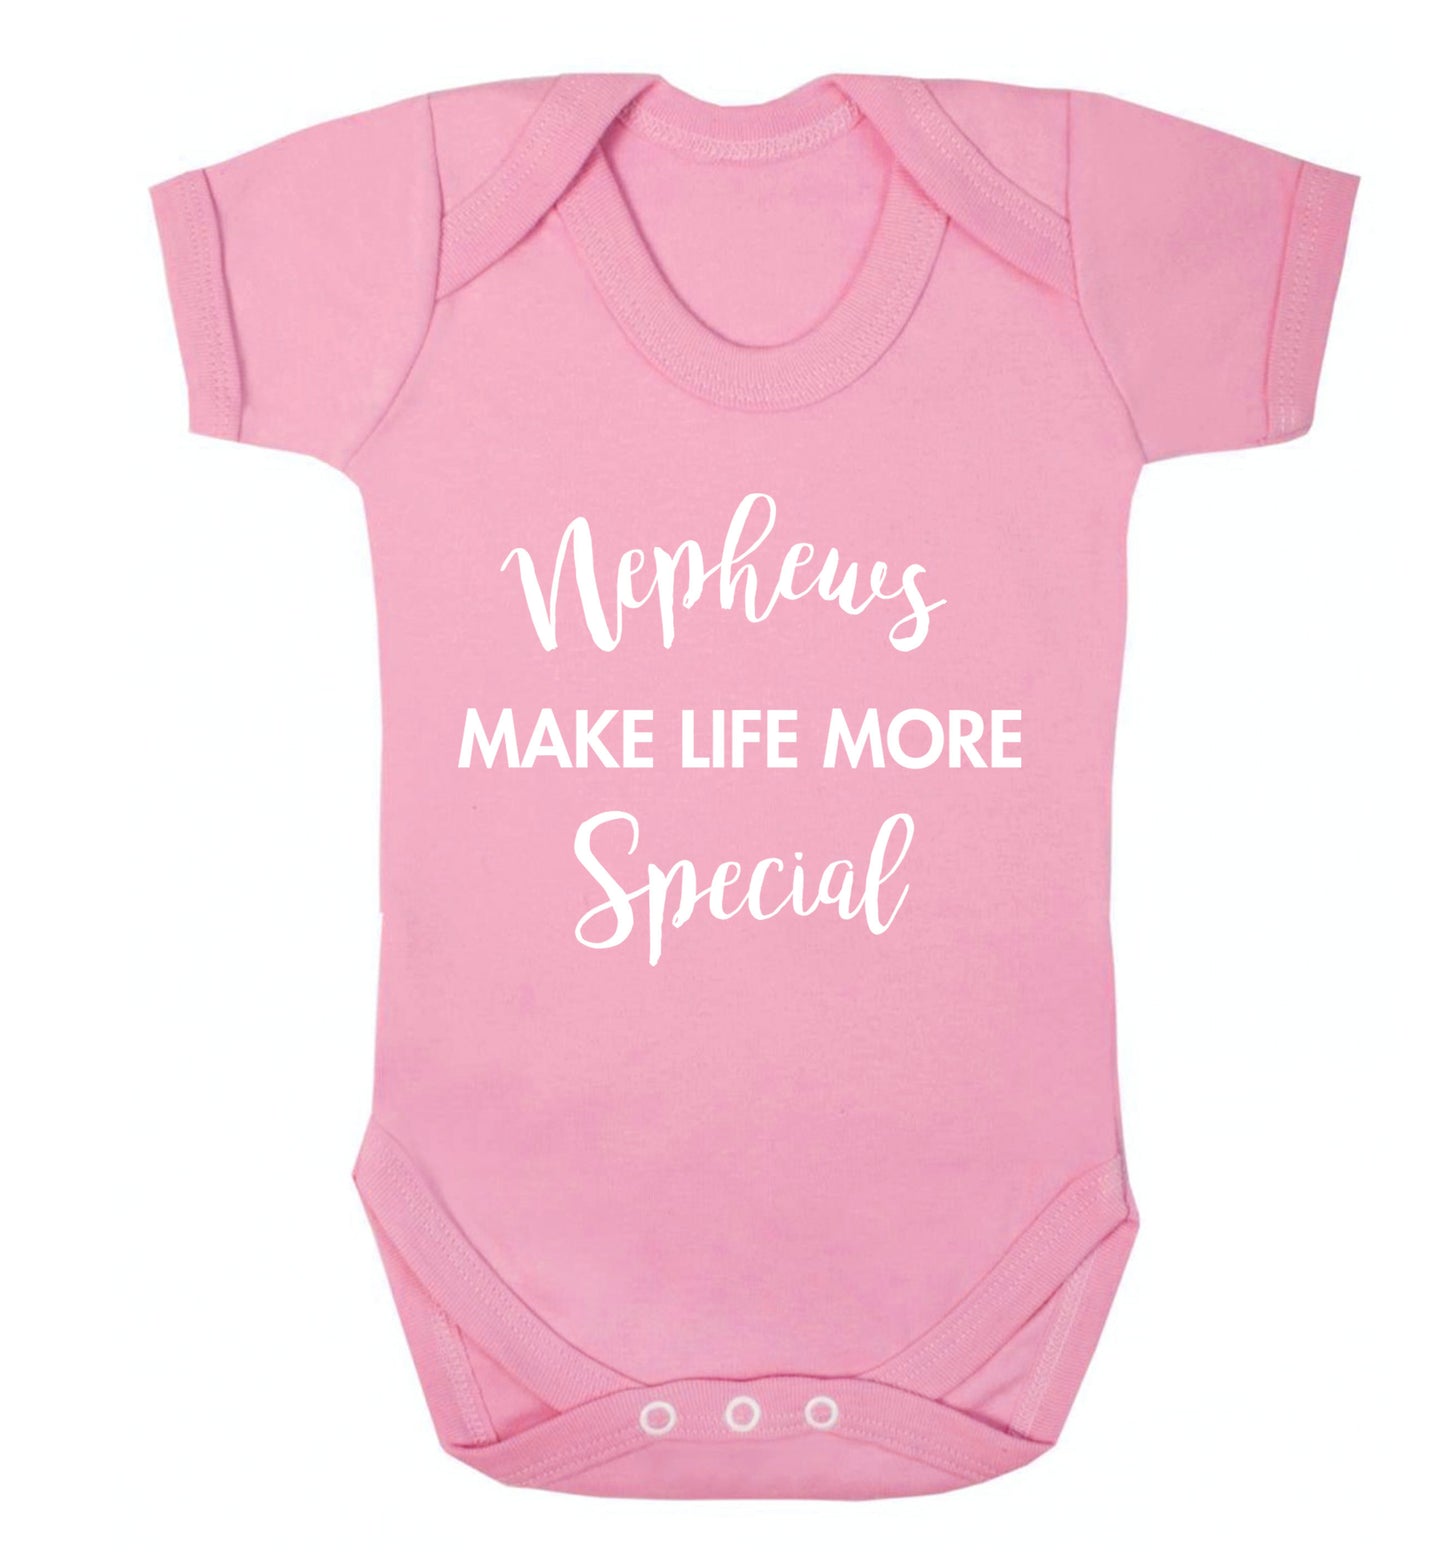 Nephews make life more special Baby Vest pale pink 18-24 months